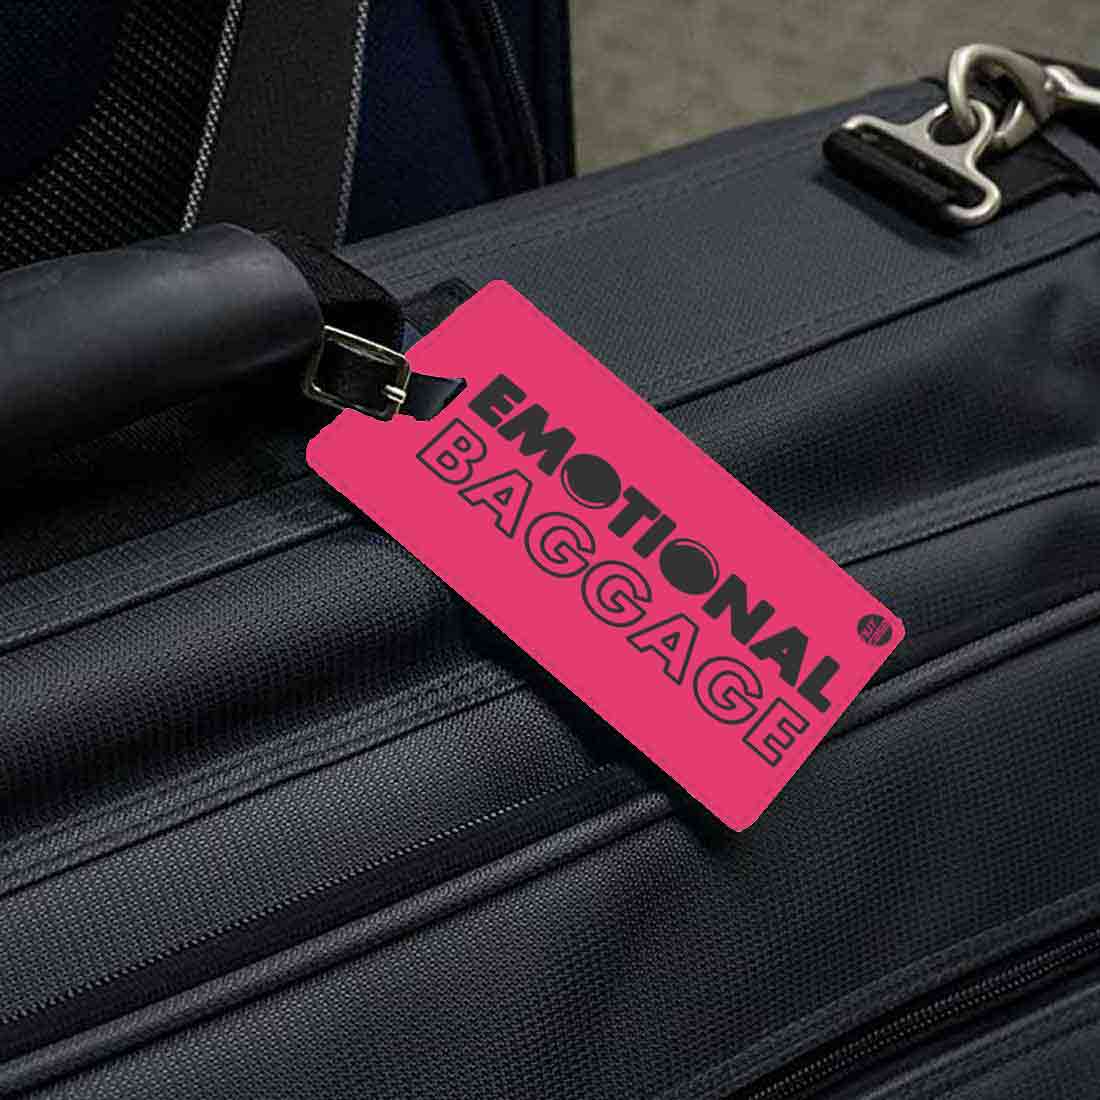 Personalized Luggage Tags with Your Name Set of 2 - Emotional